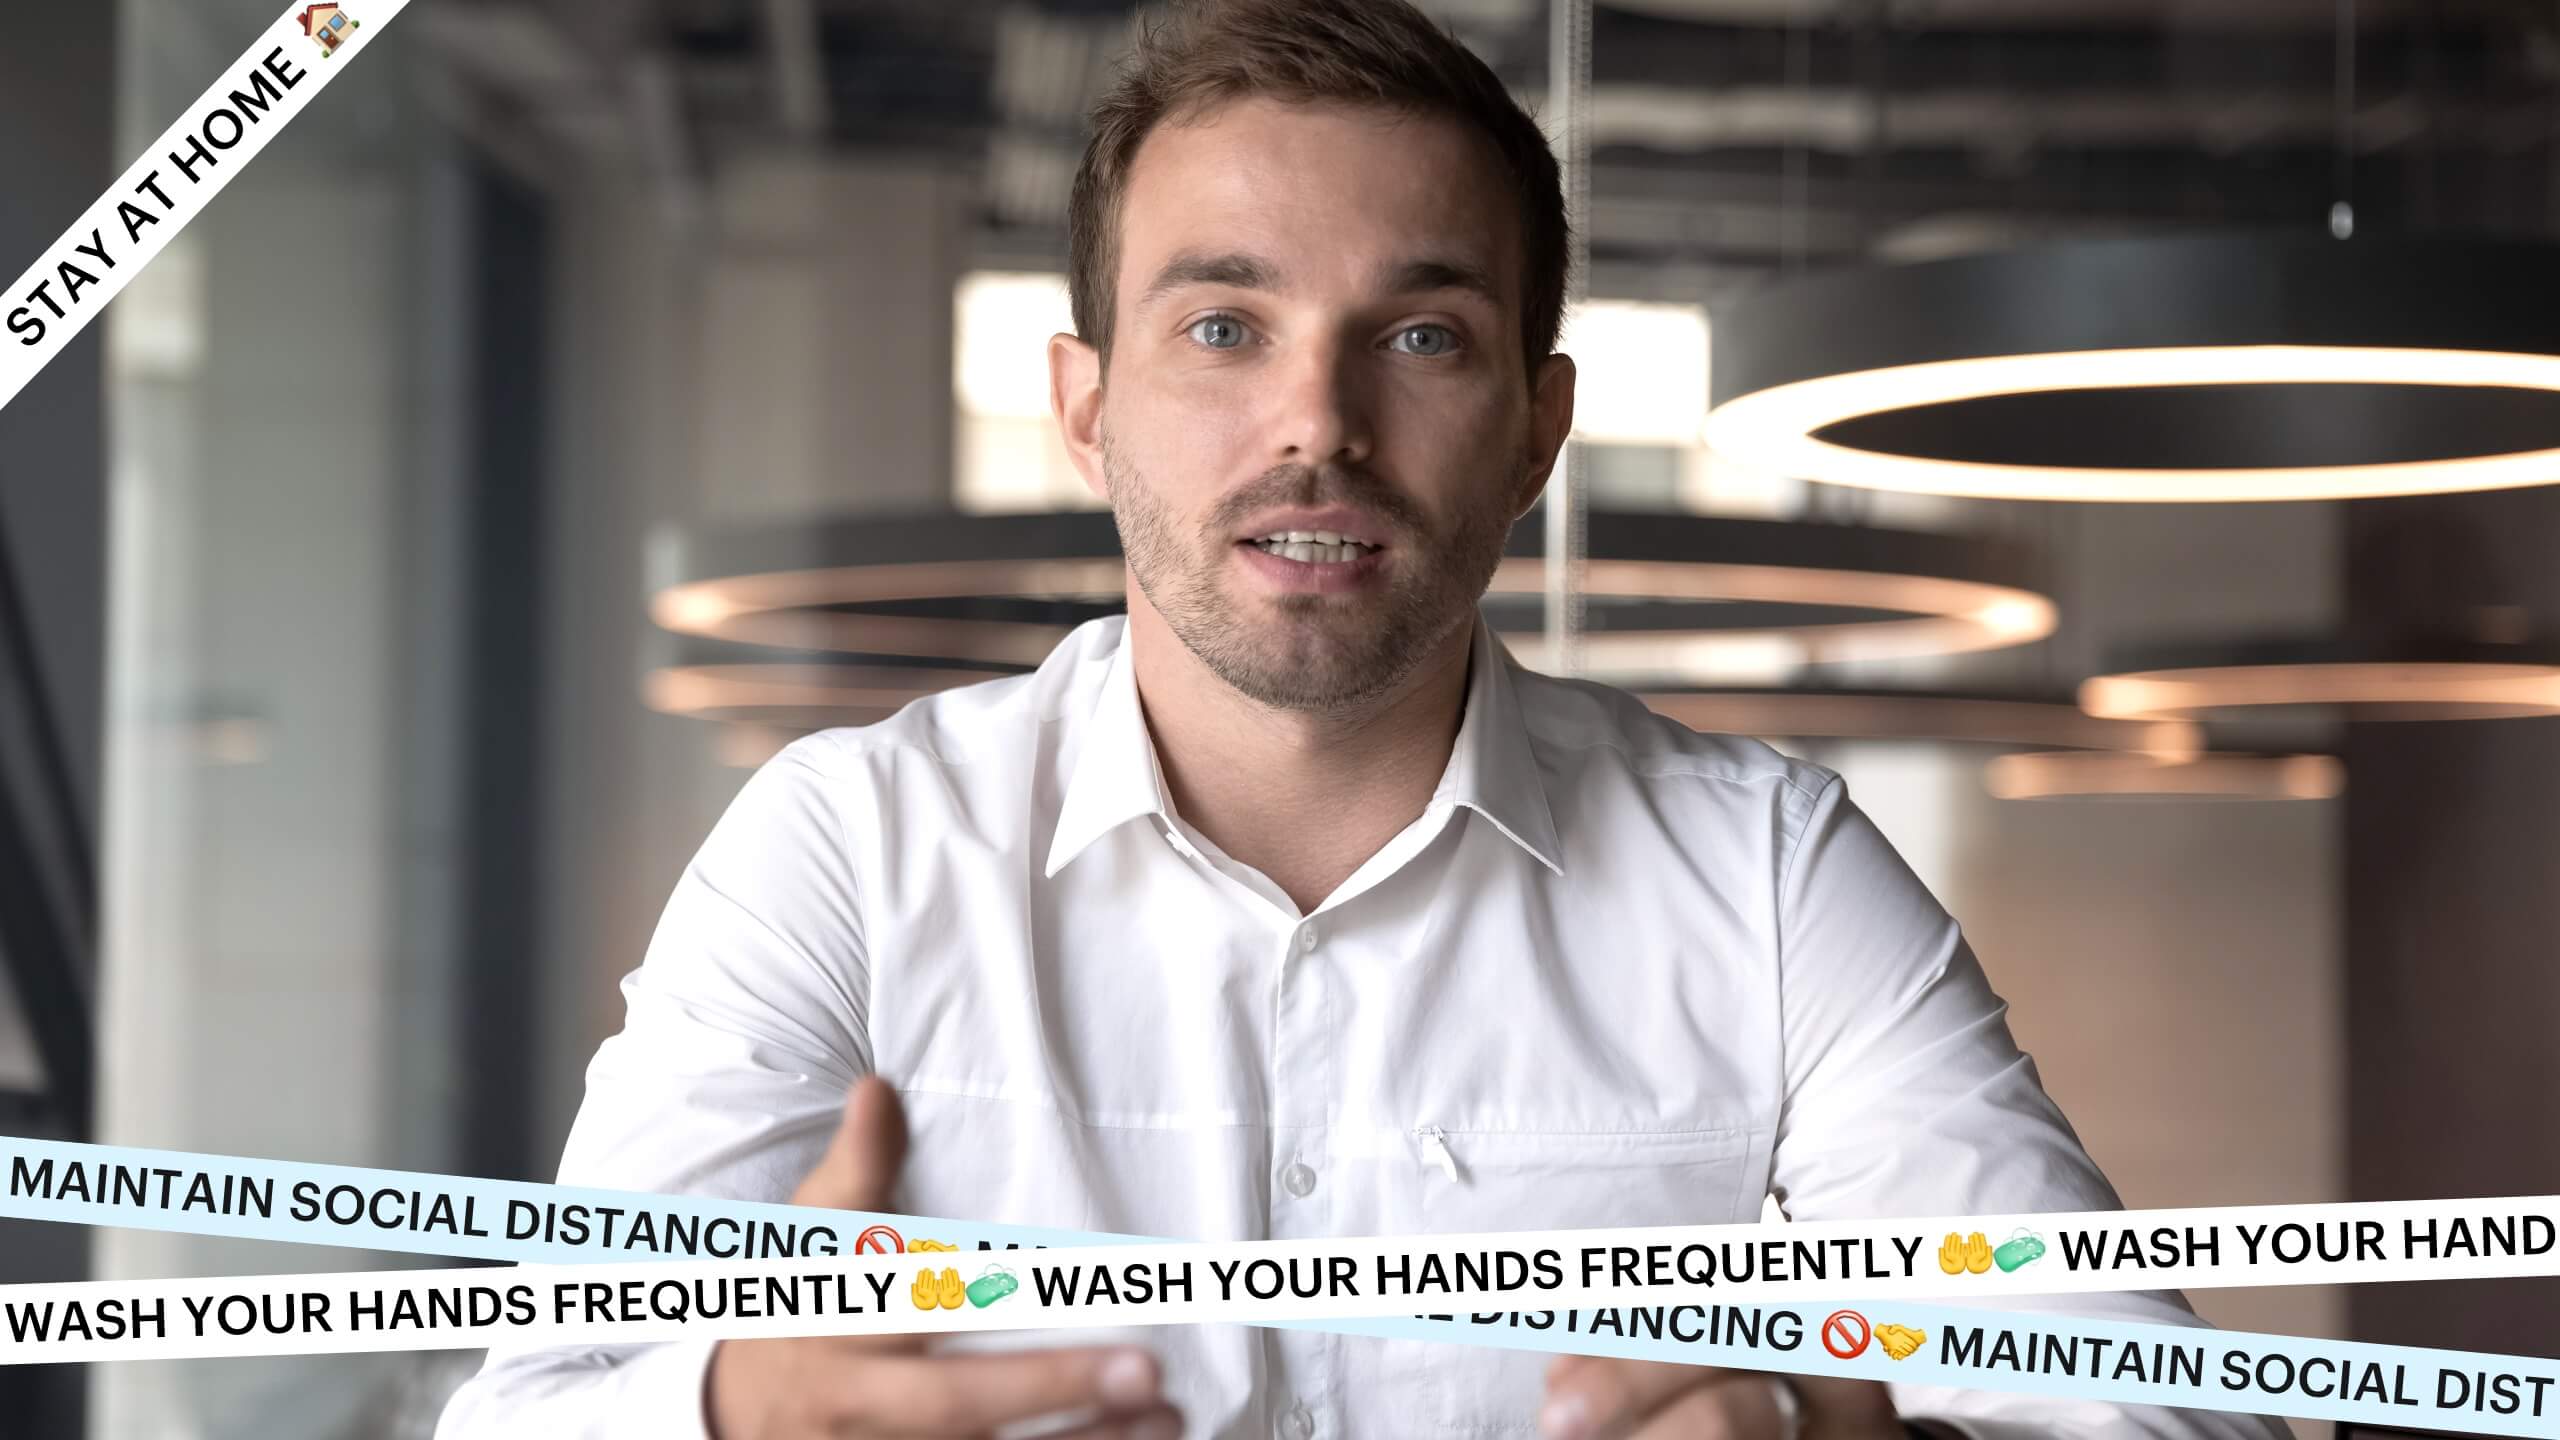 Wash your hands frequently; Maintain social distancing